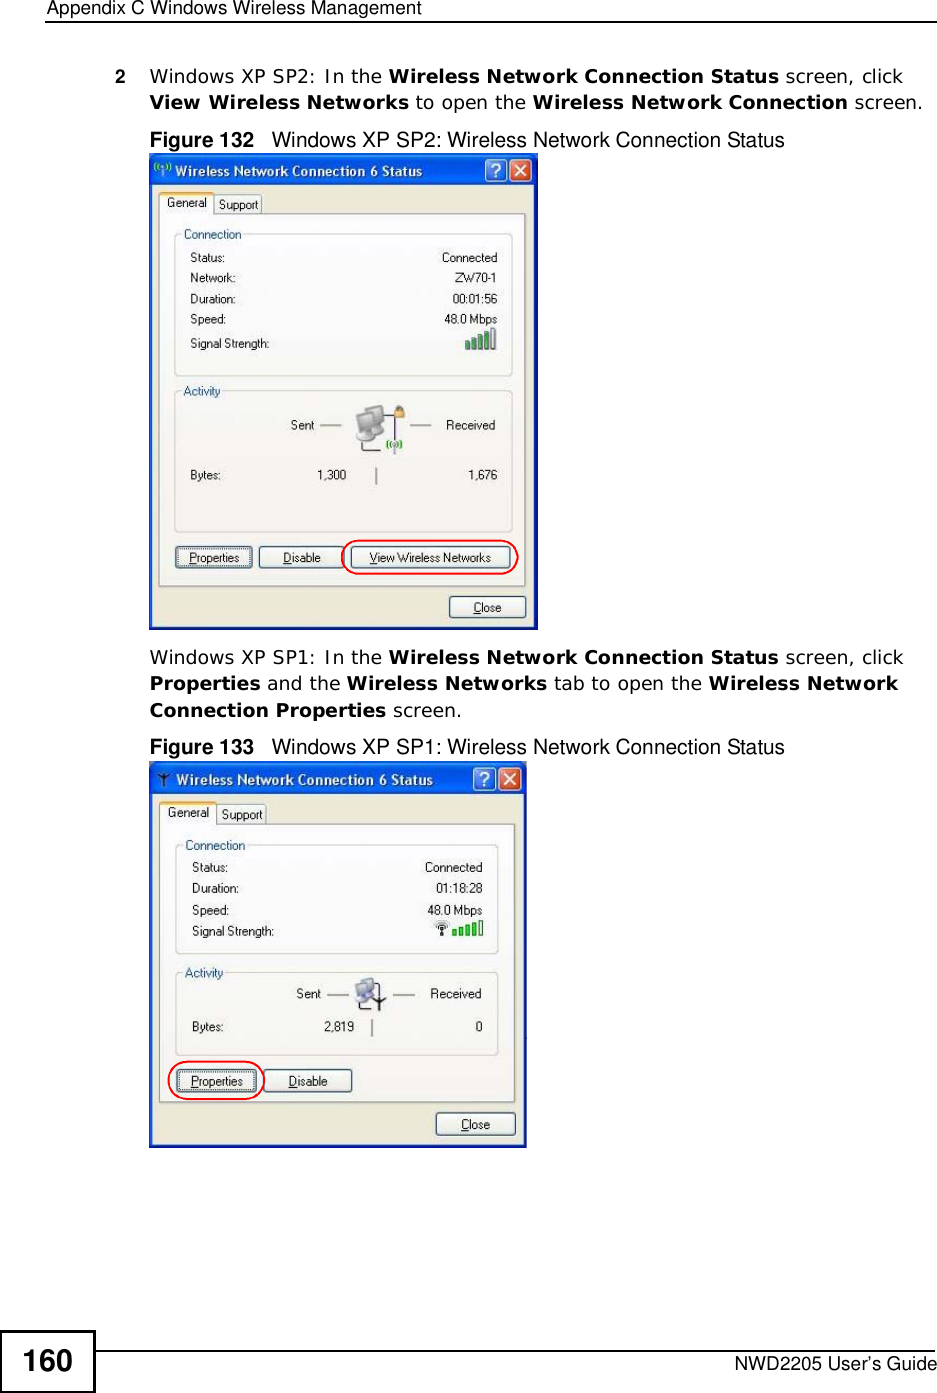 Appendix CWindows Wireless ManagementNWD2205 User’s Guide1602Windows XP SP2: In the Wireless Network Connection Status screen, click View Wireless Networks to open the Wireless Network Connection screen.Figure 132   Windows XP SP2: Wireless Network Connection StatusWindows XP SP1: In the Wireless Network Connection Status screen, click Properties and the Wireless Networks tab to open the Wireless Network Connection Properties screen.Figure 133   Windows XP SP1: Wireless Network Connection Status